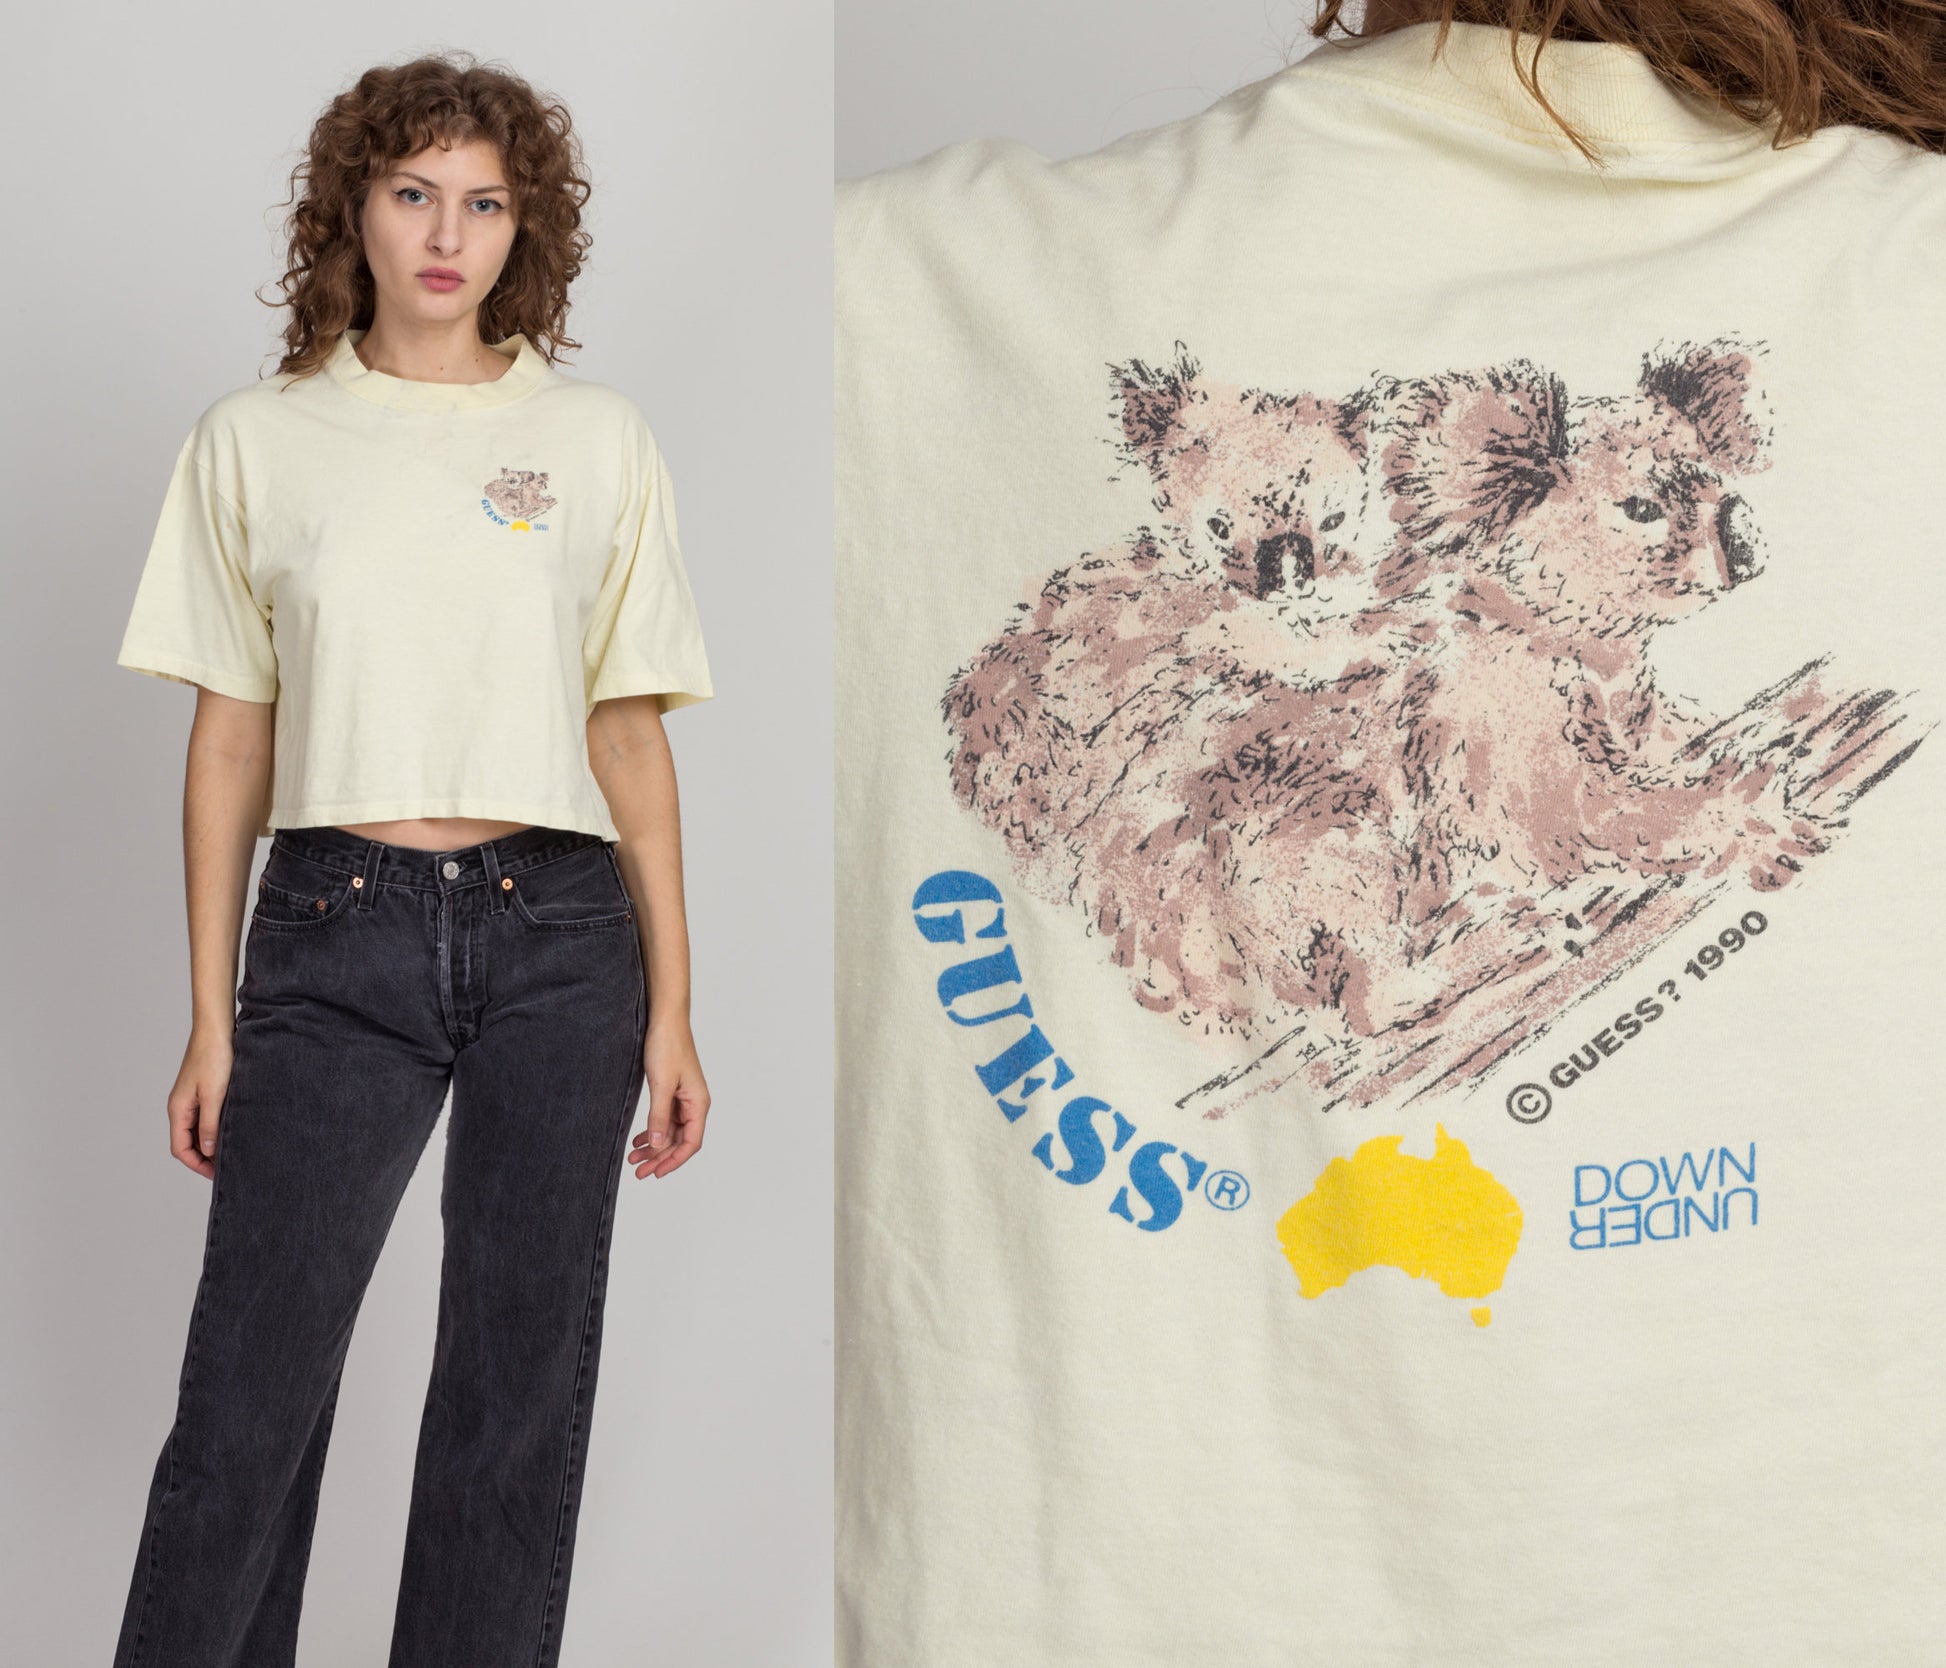 Vintage 90s Guess Jeans "Down Under" Cropped T Shirt - Extra Large 